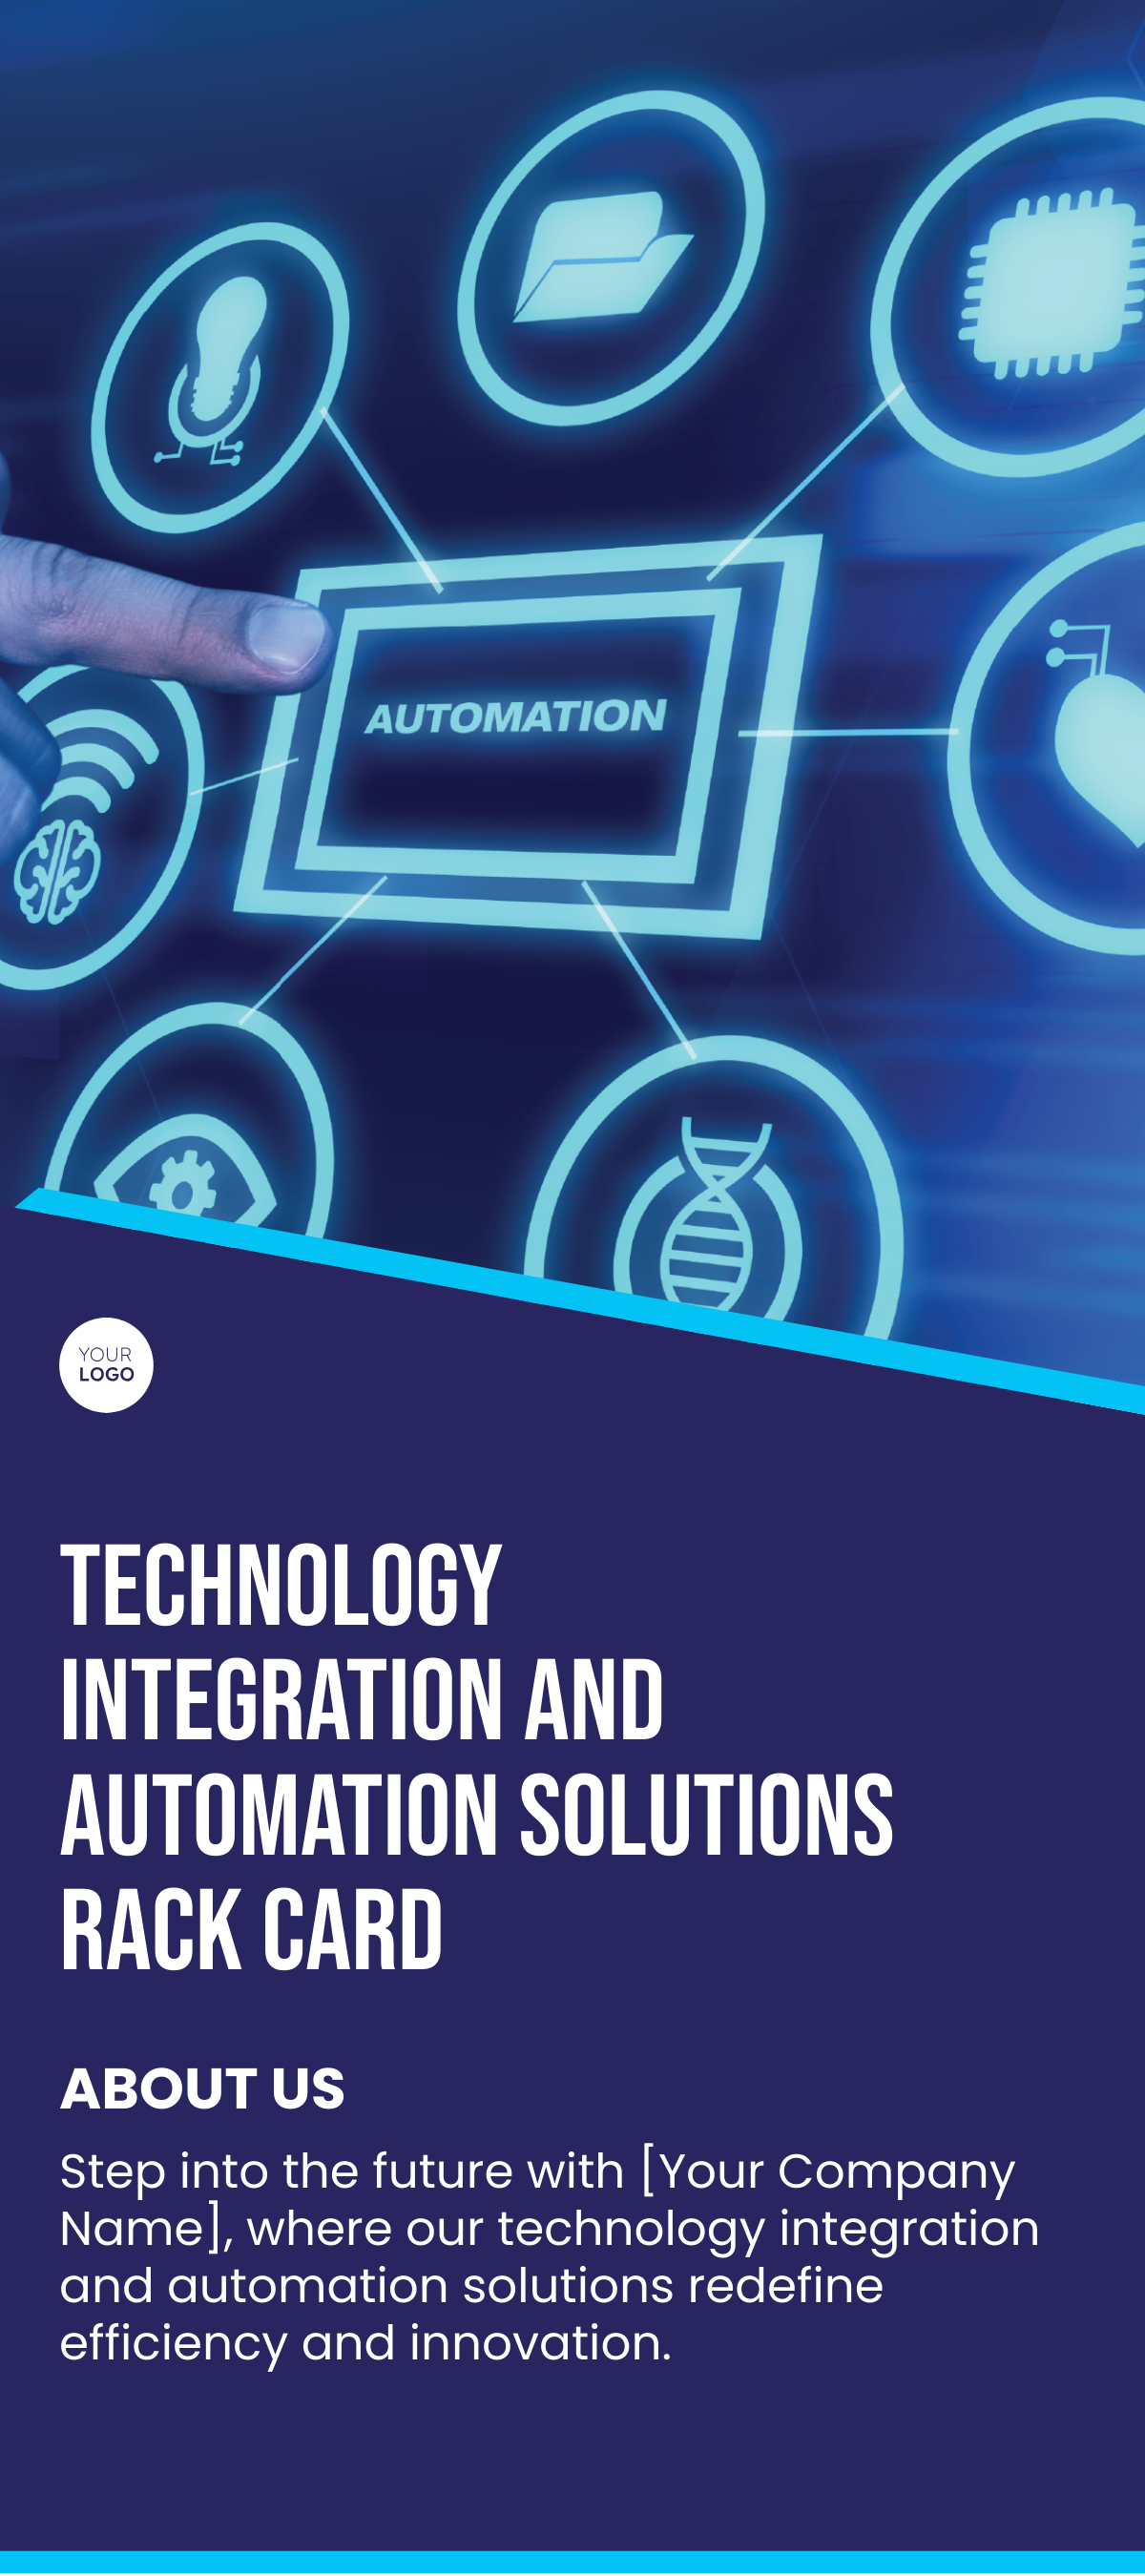 Free Technology Integration and Automation Solutions Rack Card Template